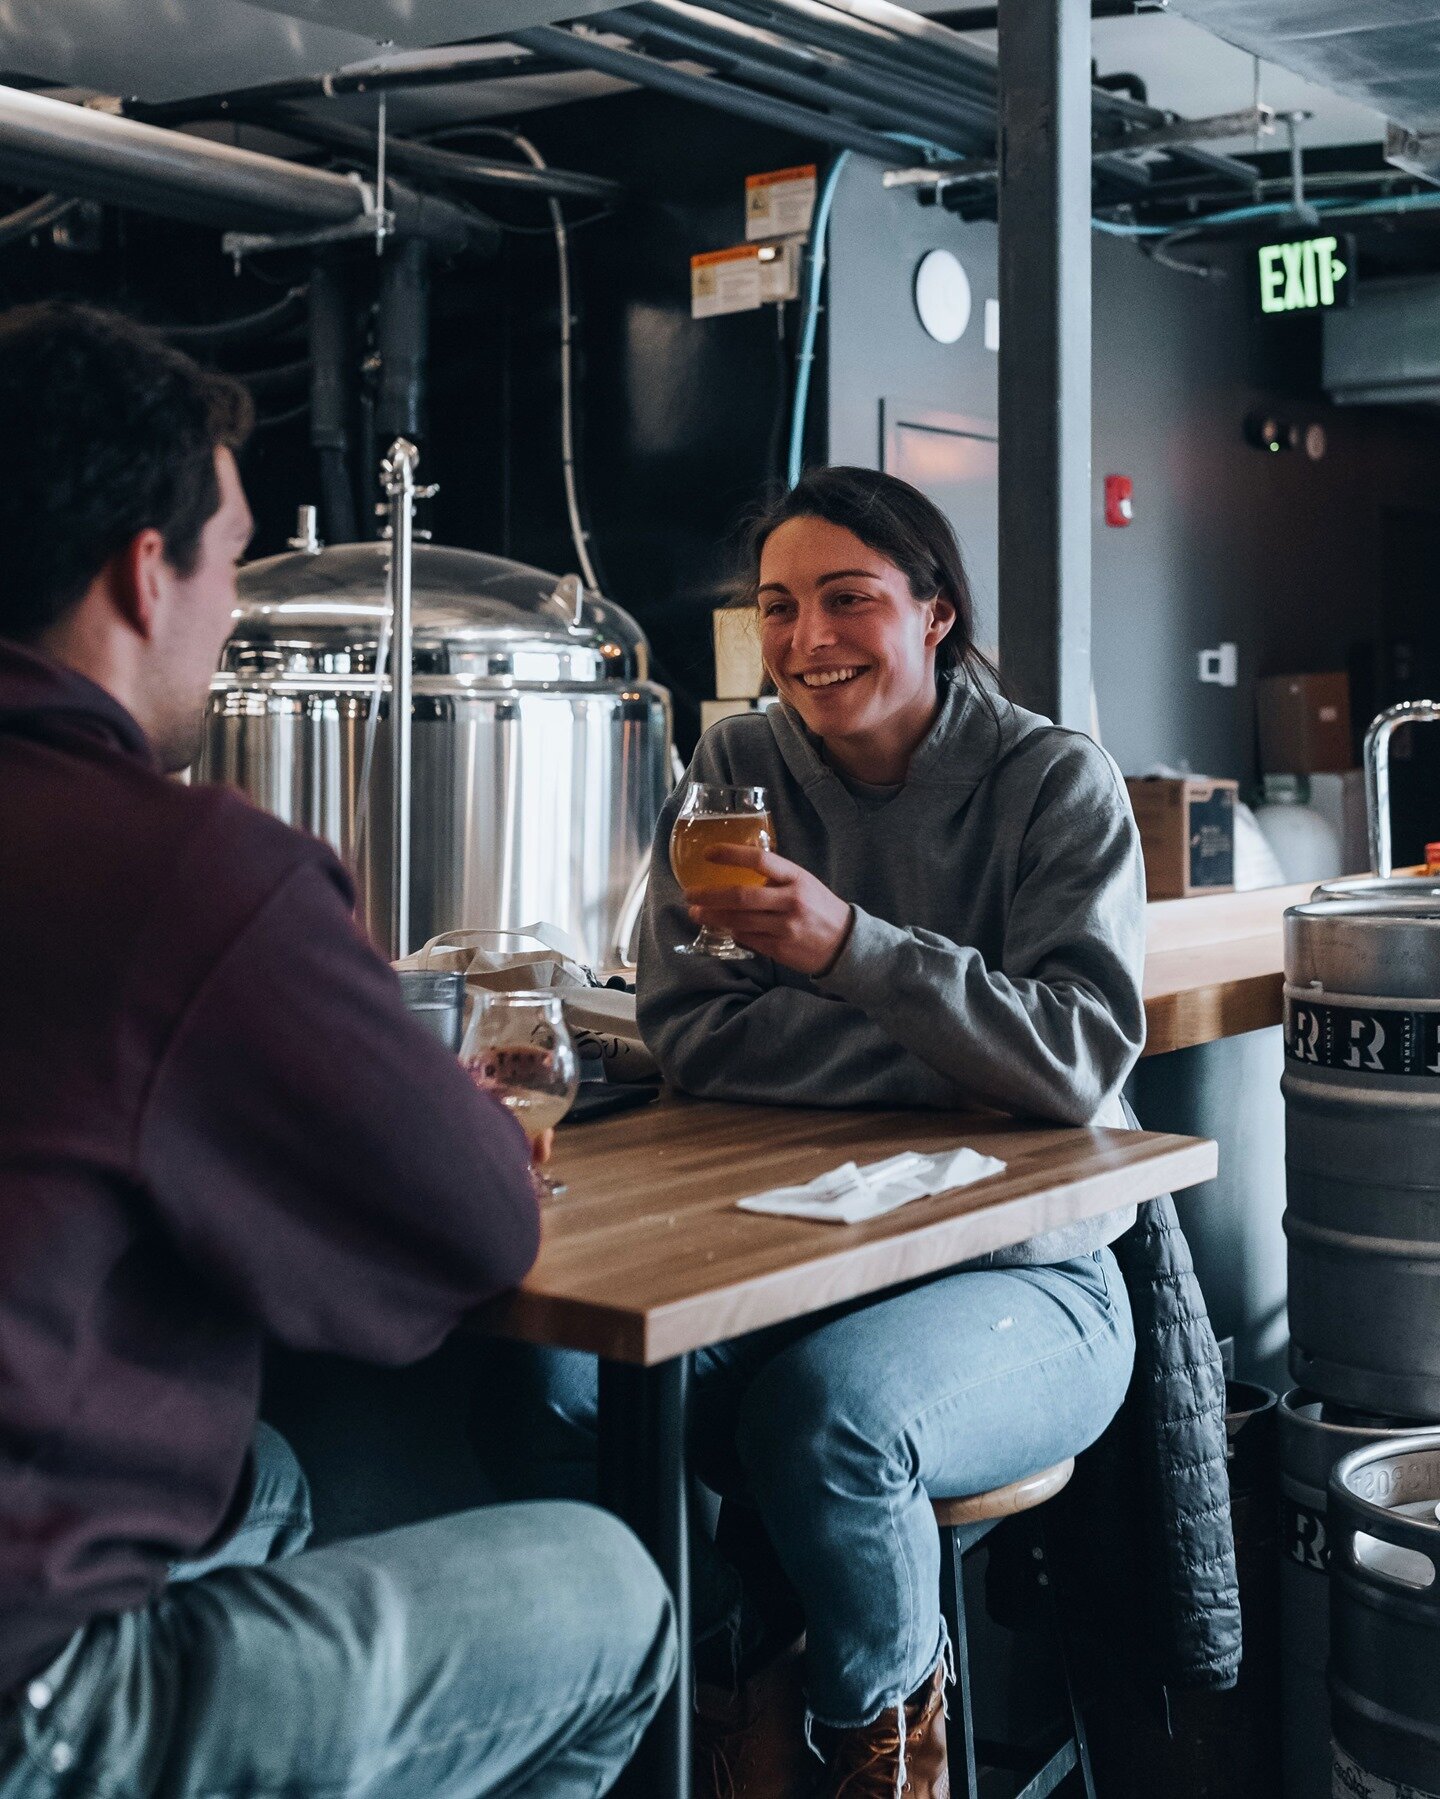 Cheers to the weekend!🍻 We have indoor and outdoor tables, and are doing our best to keep some space for walkins. Come check it out - there could be a very special table for you! 🌞